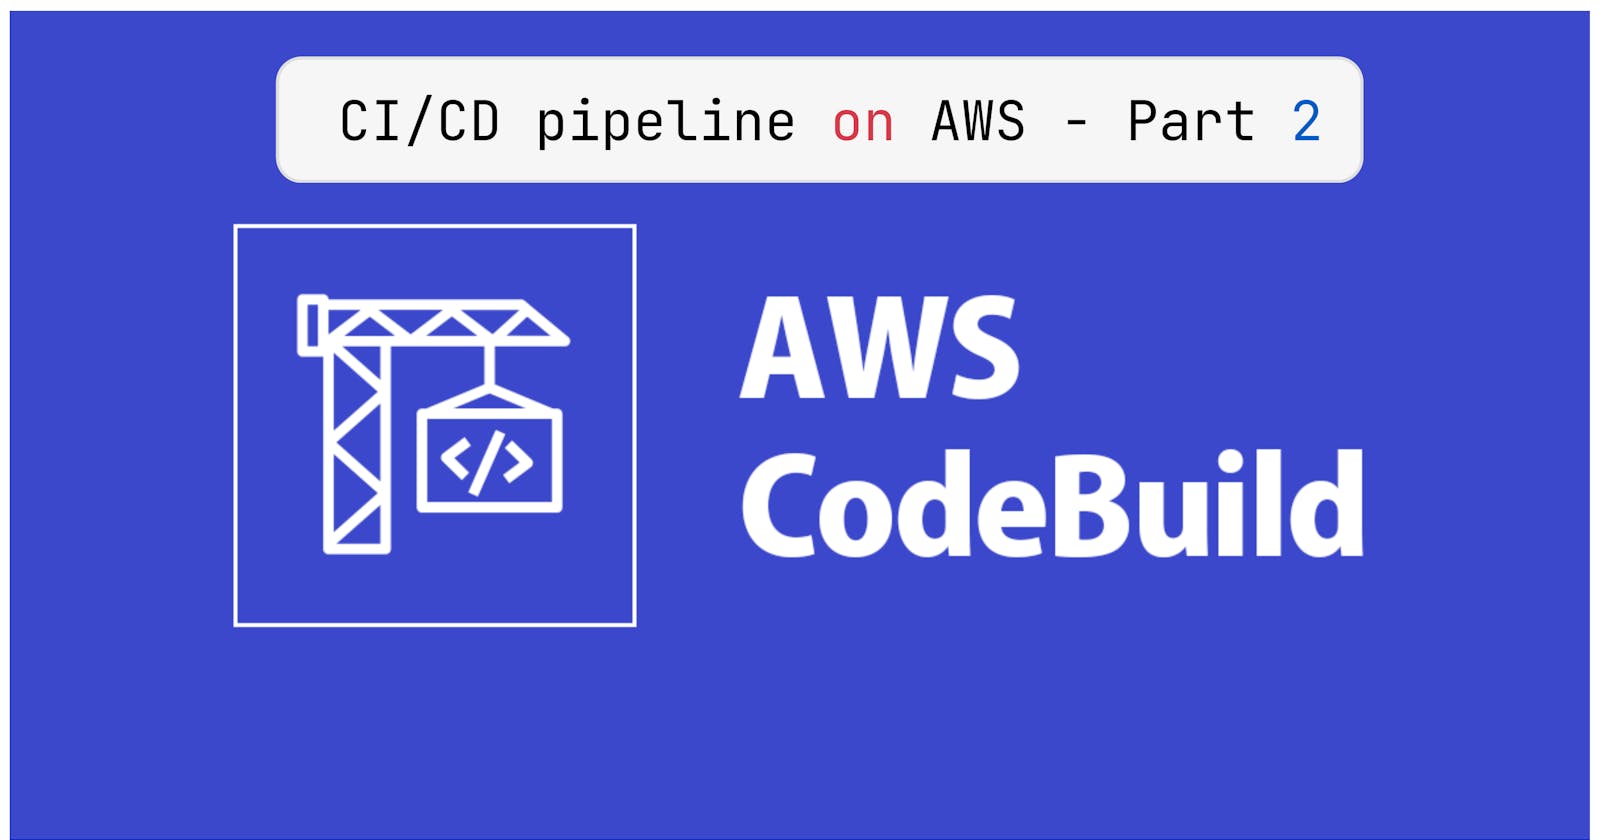 Day 51: CI/CD pipeline on AWS - Part 2 🚀